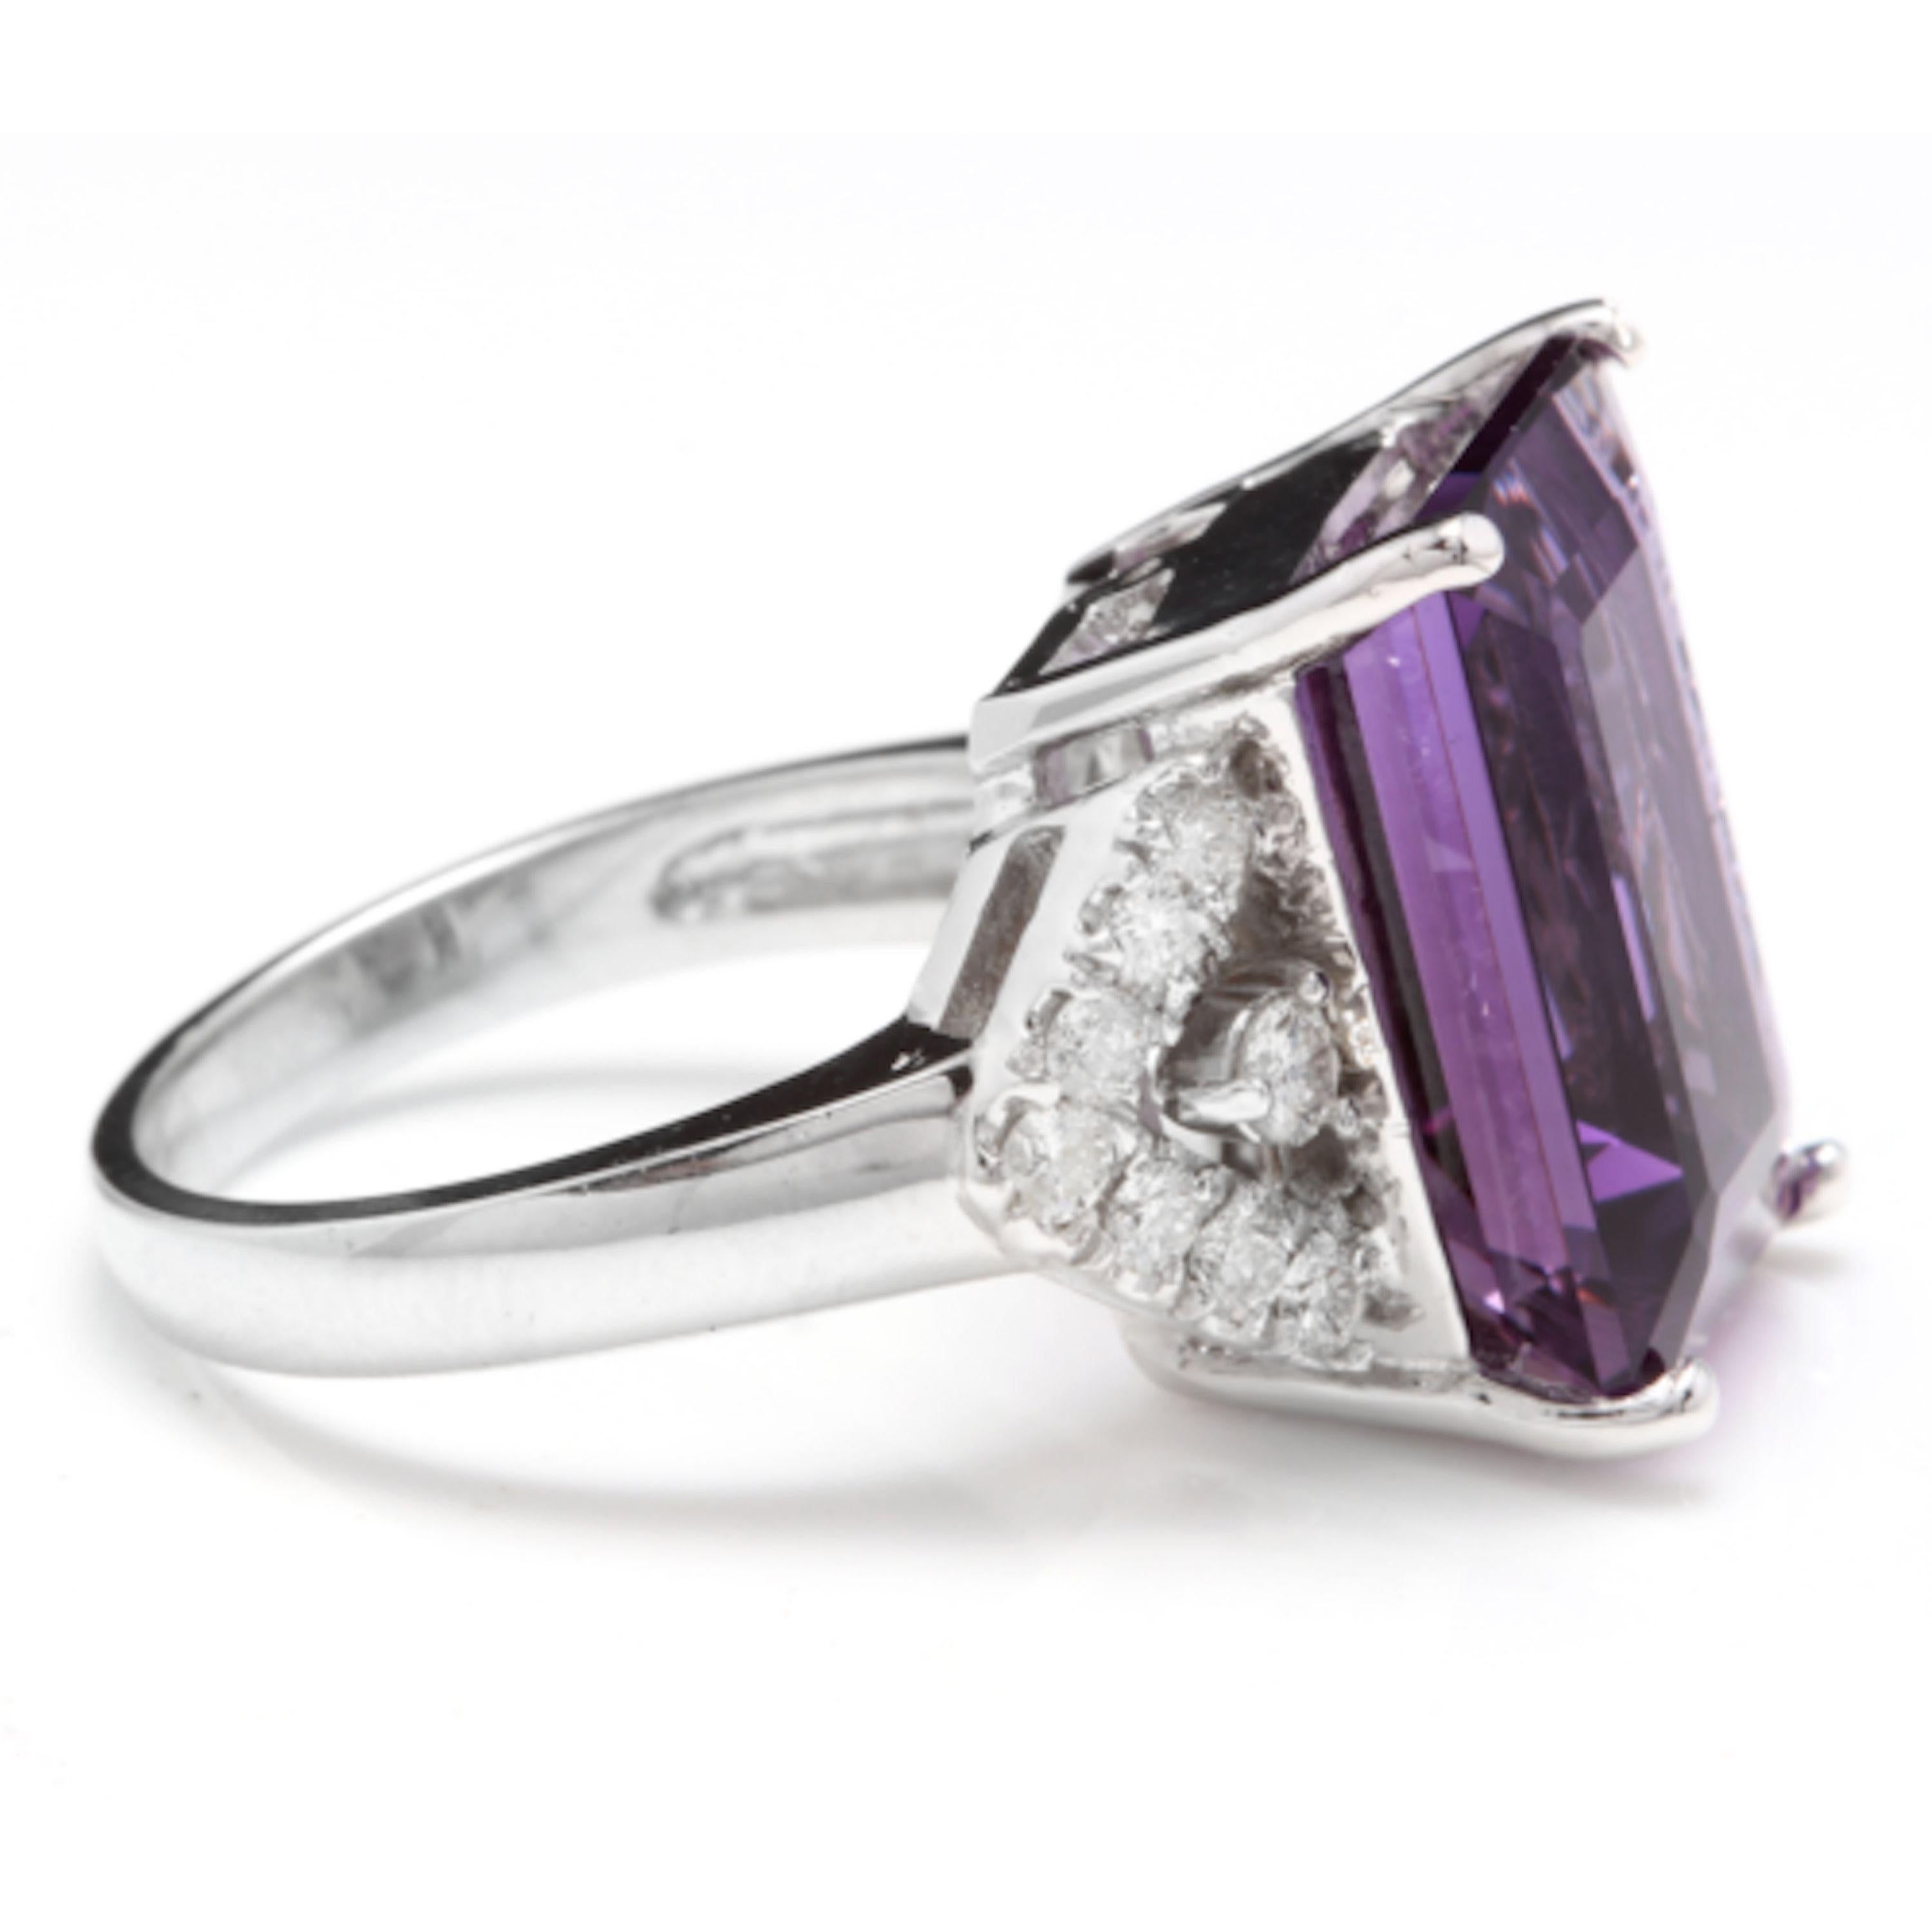 Mixed Cut 14.70 Carat Natural Amethyst and Diamond 14 Karat Solid White Gold Ring For Sale